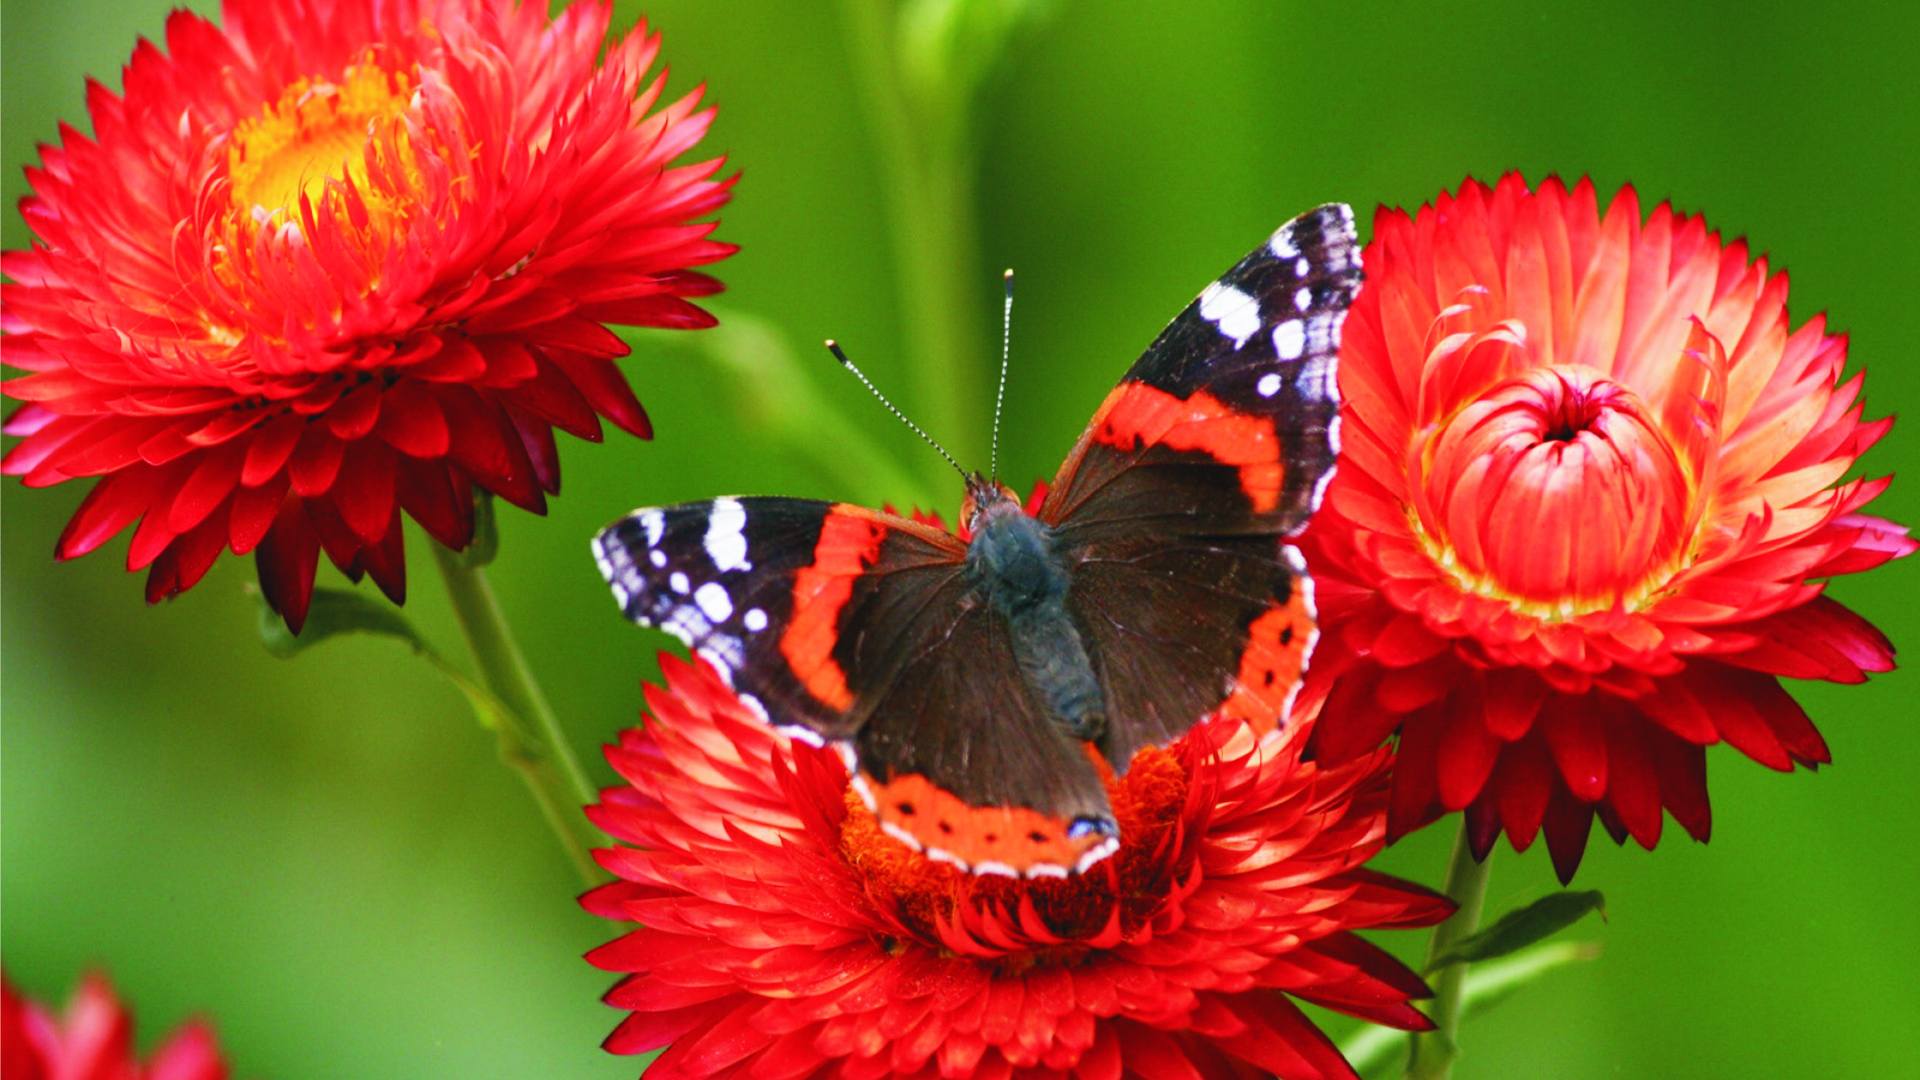 A-butterfly-on-some-red-peonies-HD-wallpaper_1920x1080.jpg